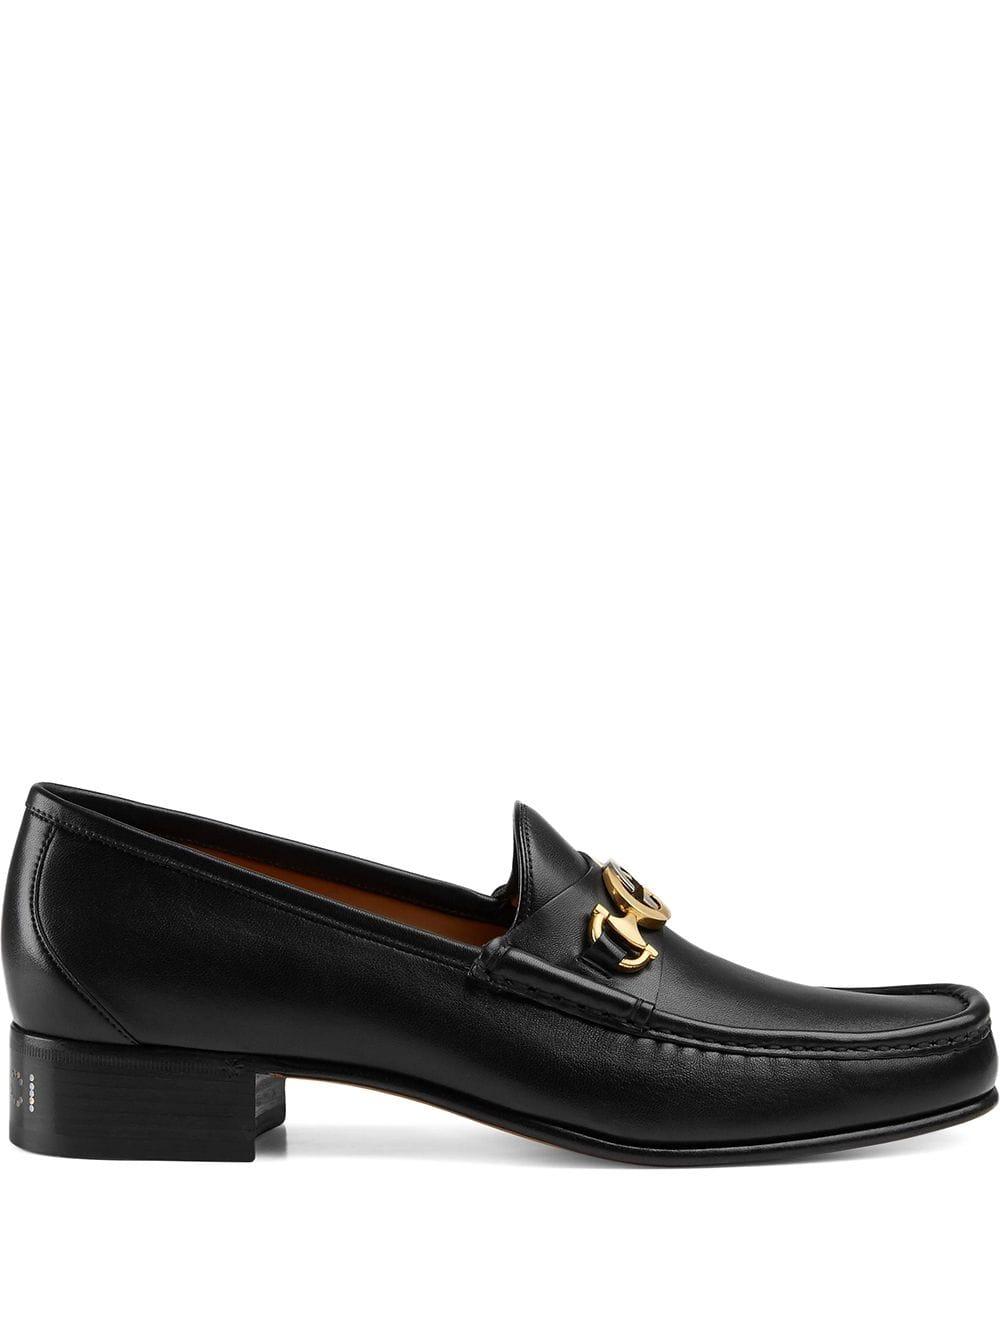 Gucci Leather Moccasin With GG in Black for Men - Lyst